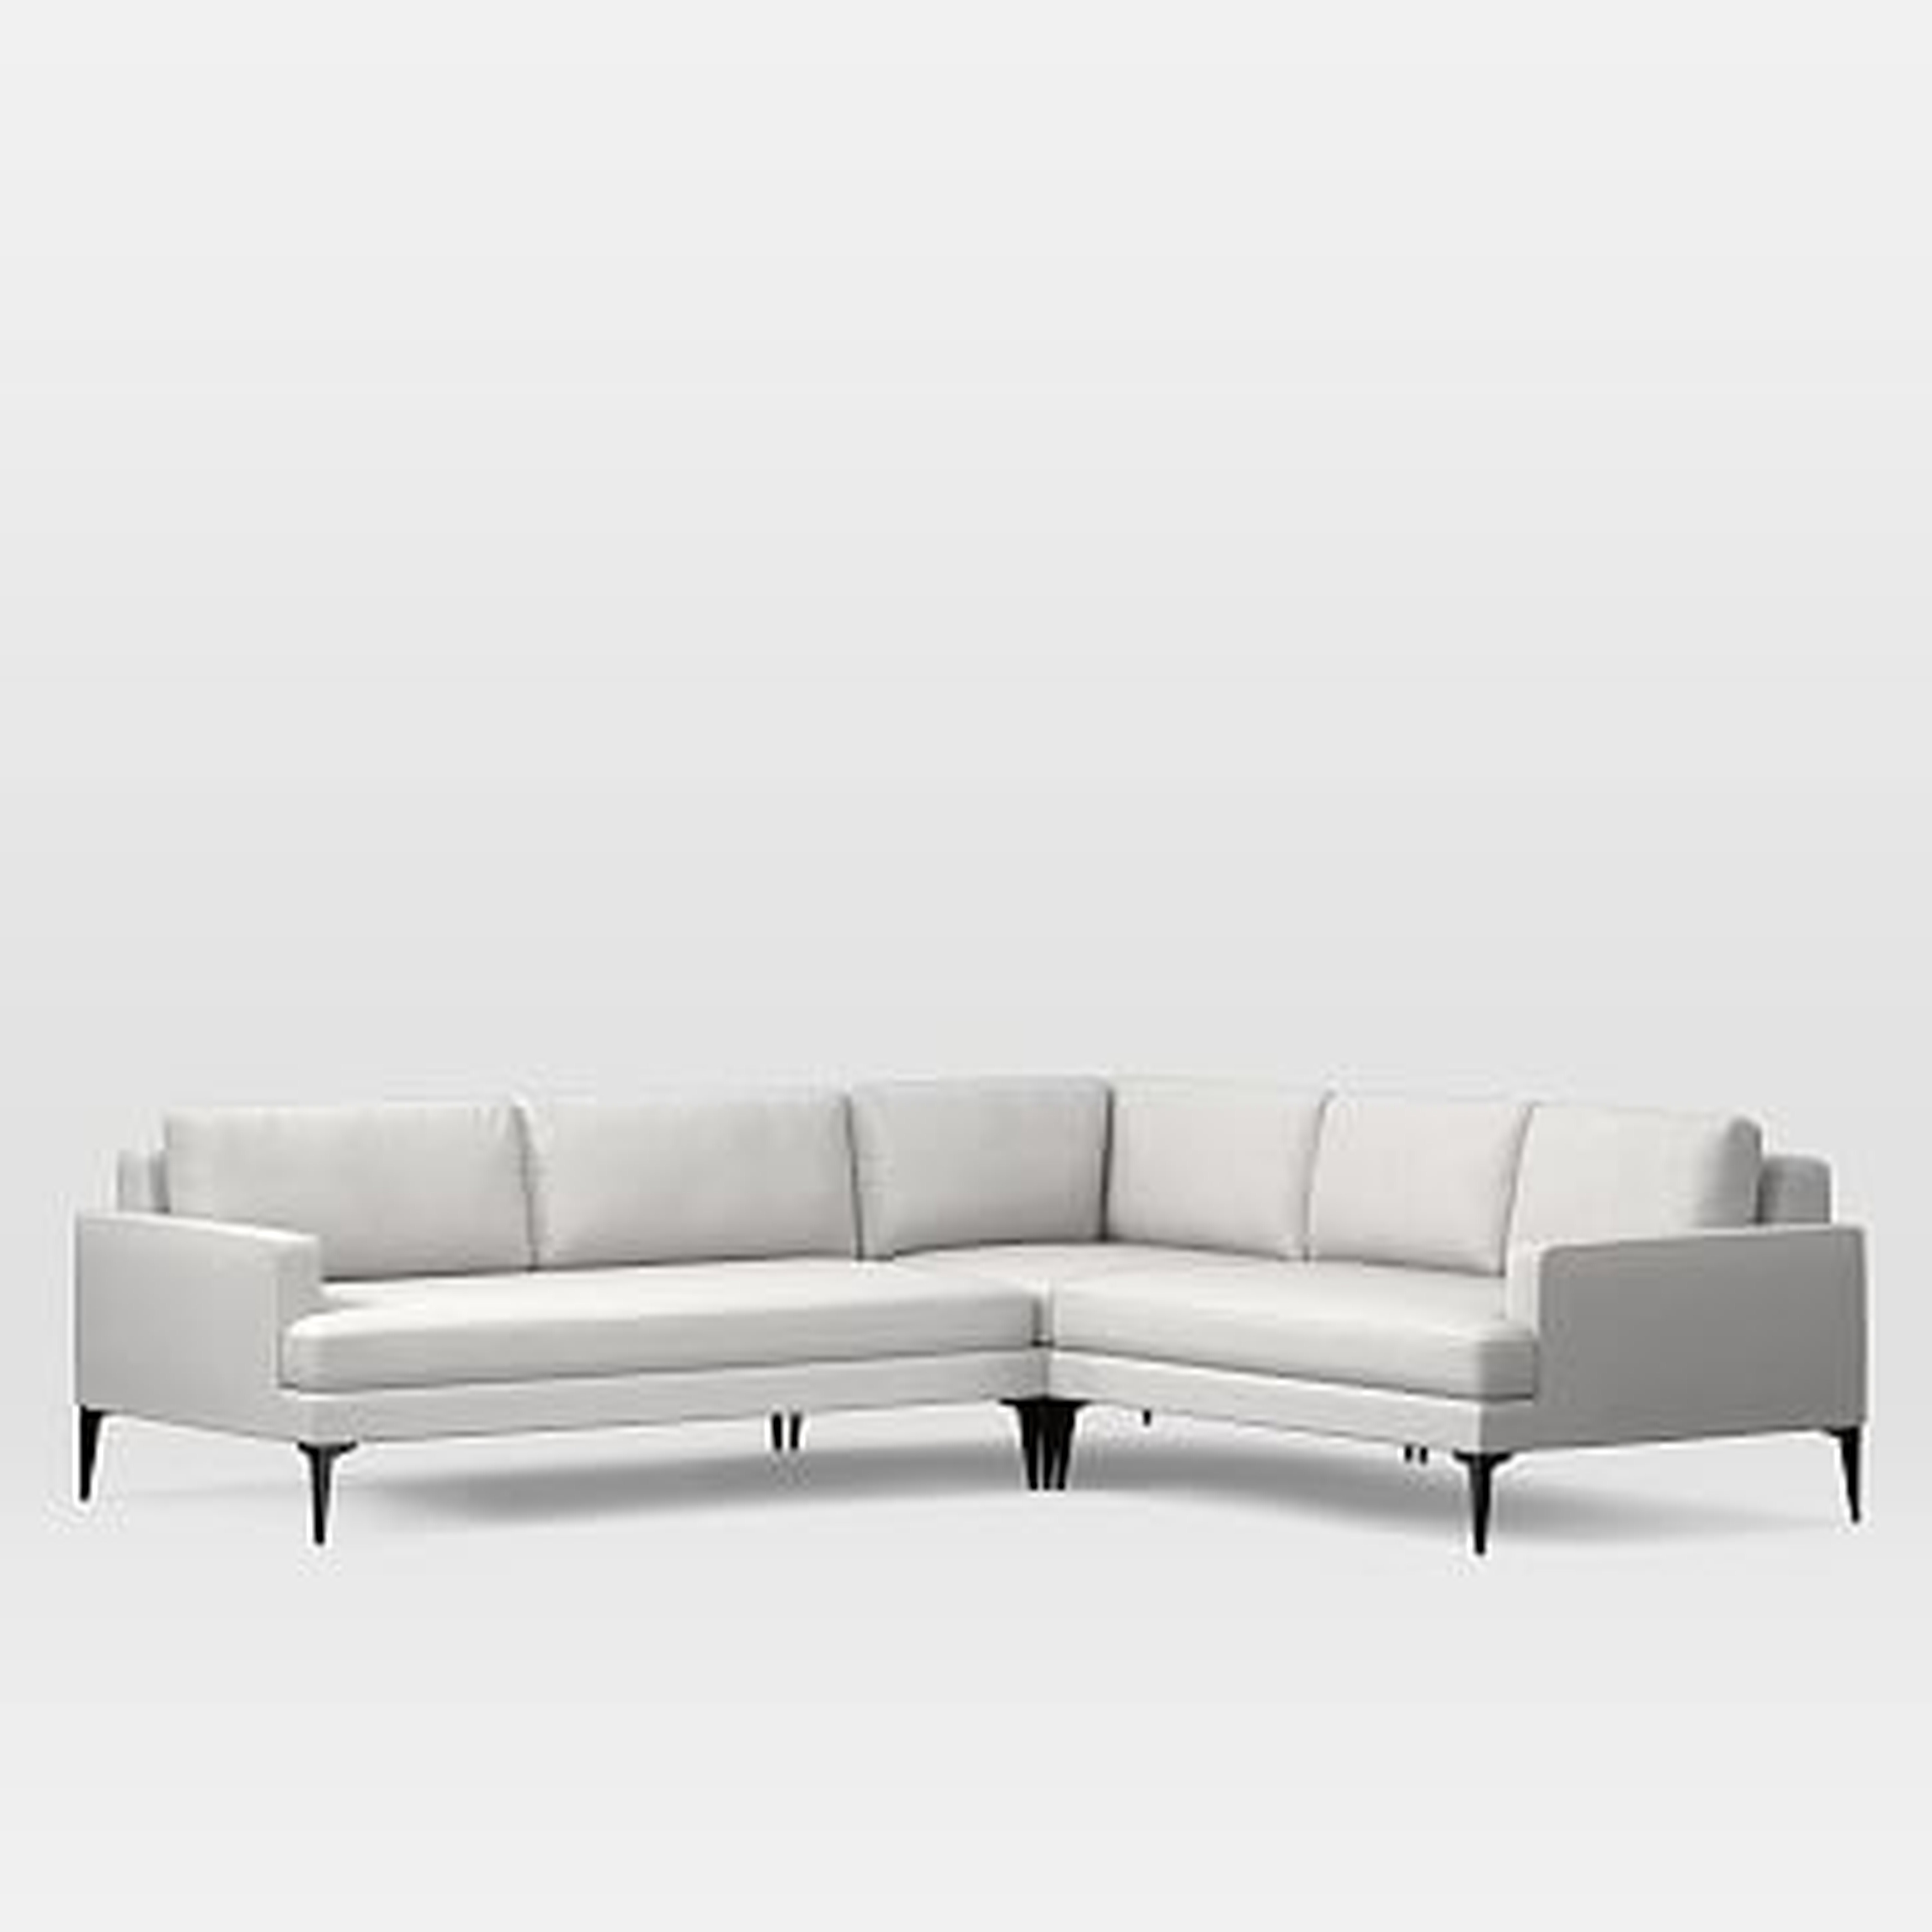 Andes Sectional Set 07: Left Arm 2.5 Seater Sofa, Corner, Right Arm 2 Seater Sofa, Eco Weave, Oyster, Dark Pewter - West Elm